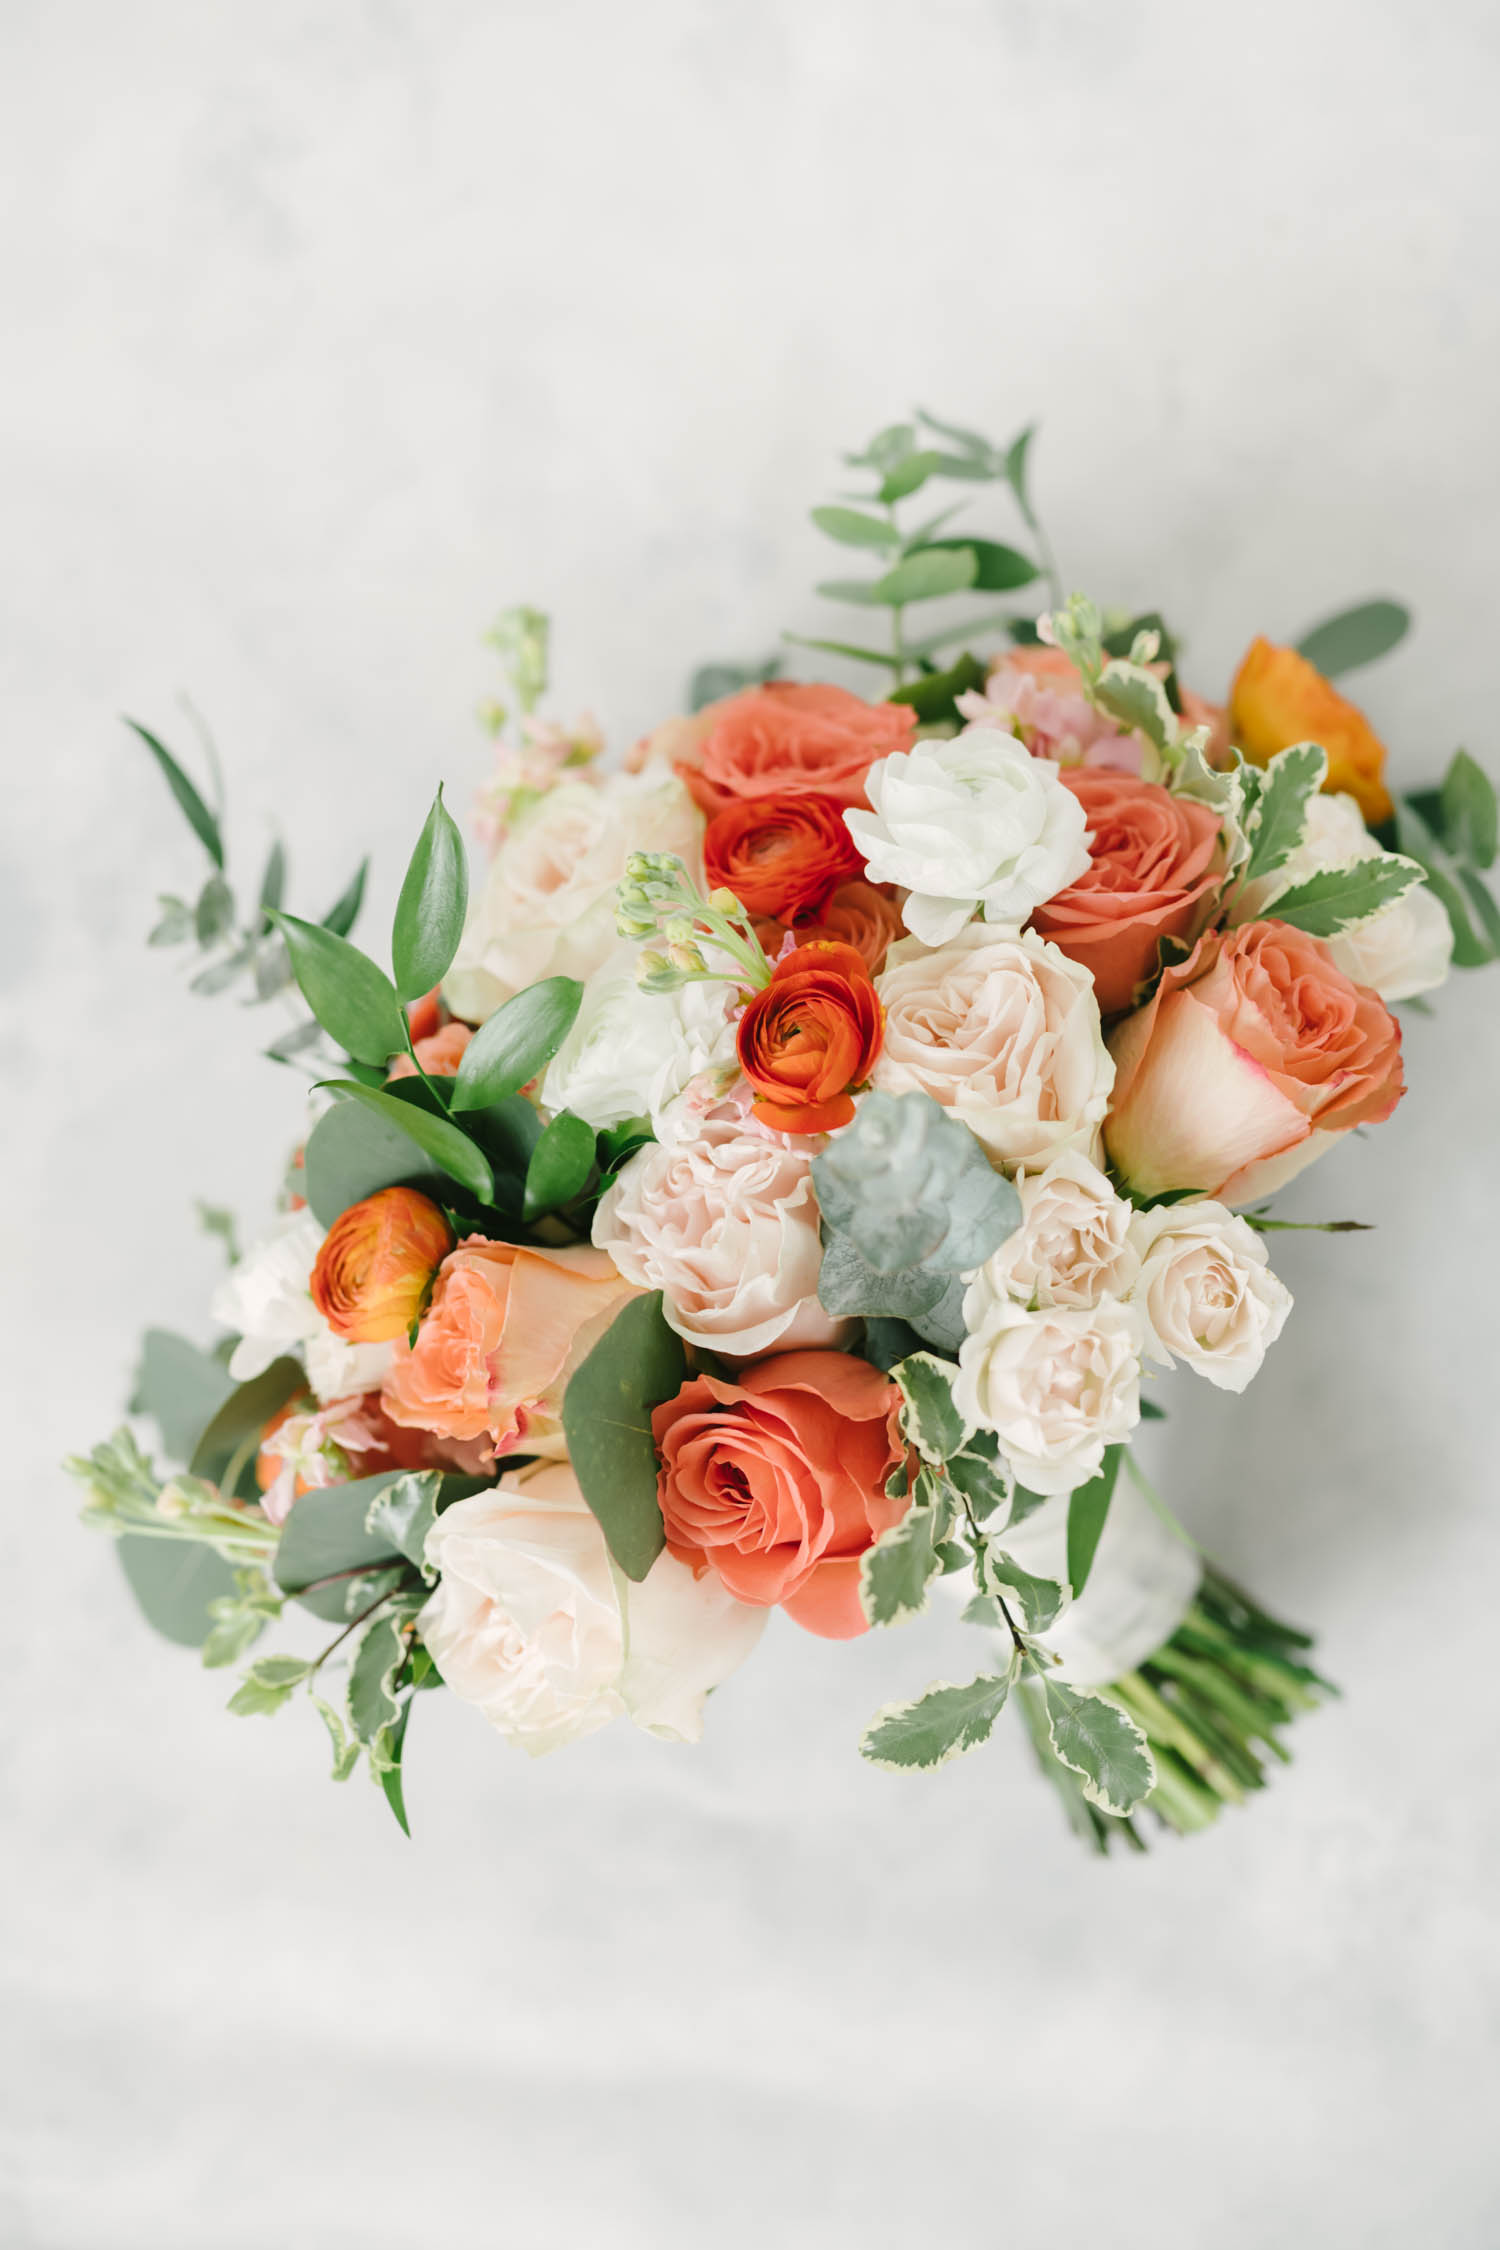 Beautiful coral and white floral arrangement with roses and eucalyptus for wedding in wallisville texas by Christina Elliott Photography. wedding floral arrangements spring wedding florals coral floral arrangements #christinaelliotphoto #christinaelliotphotography #christinaelliotelopements #elopementphotographer #wallisvillewedding #houstontexaswedding #houstonweddingphotographer #trinityfarmhouse #texaselopements #elopement #springwedding